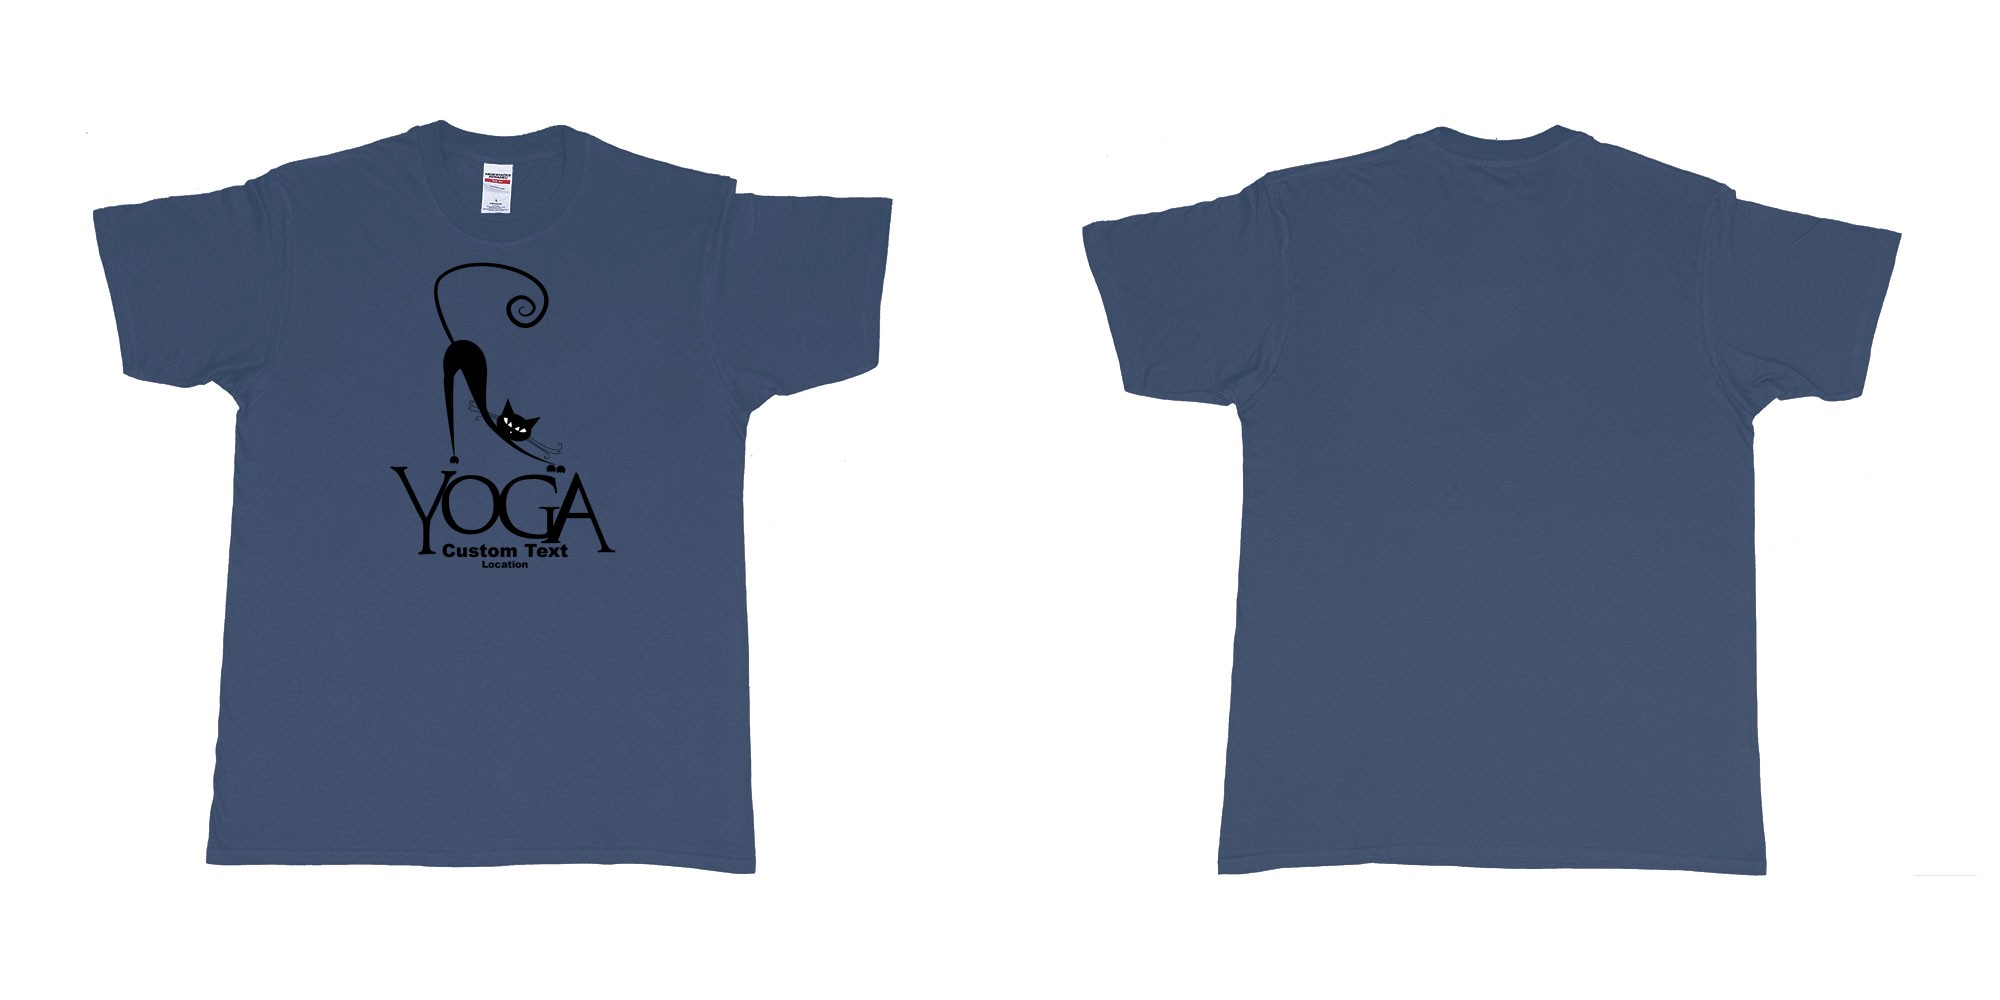 Custom tshirt design cat yoga custom text location print in fabric color navy choice your own text made in Bali by The Pirate Way